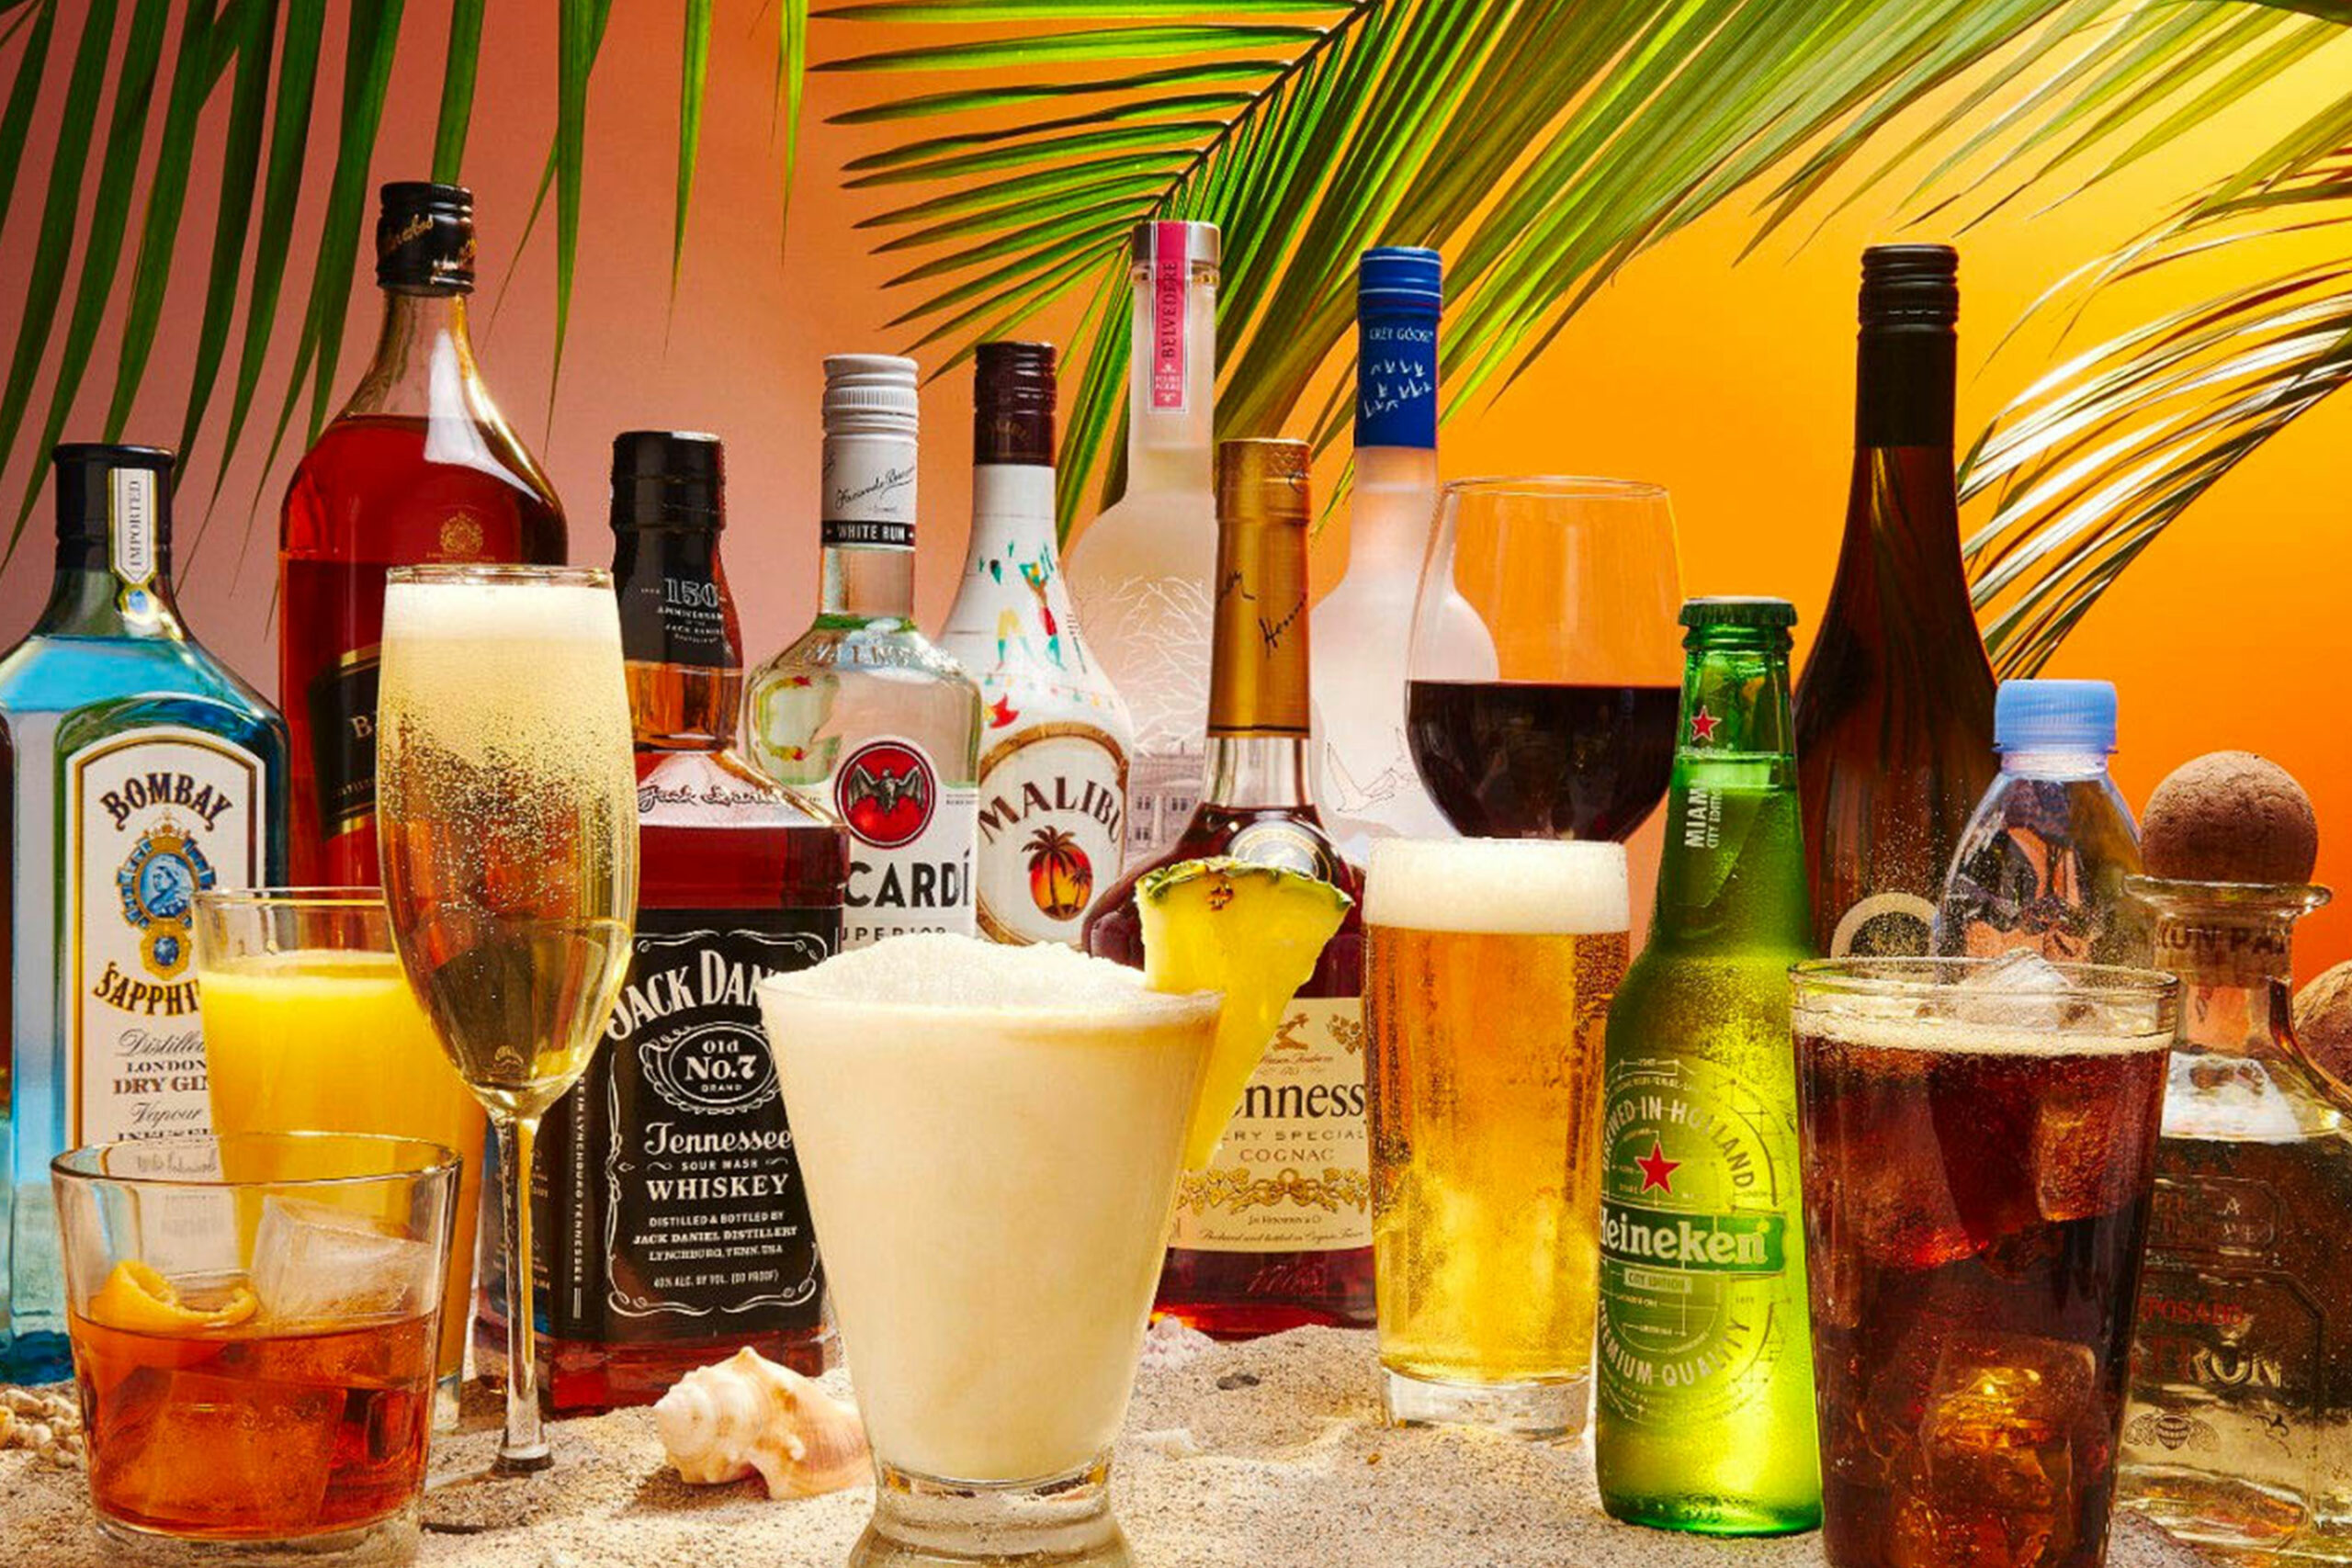 Our Guide to Royal Caribbean Beverage Packages